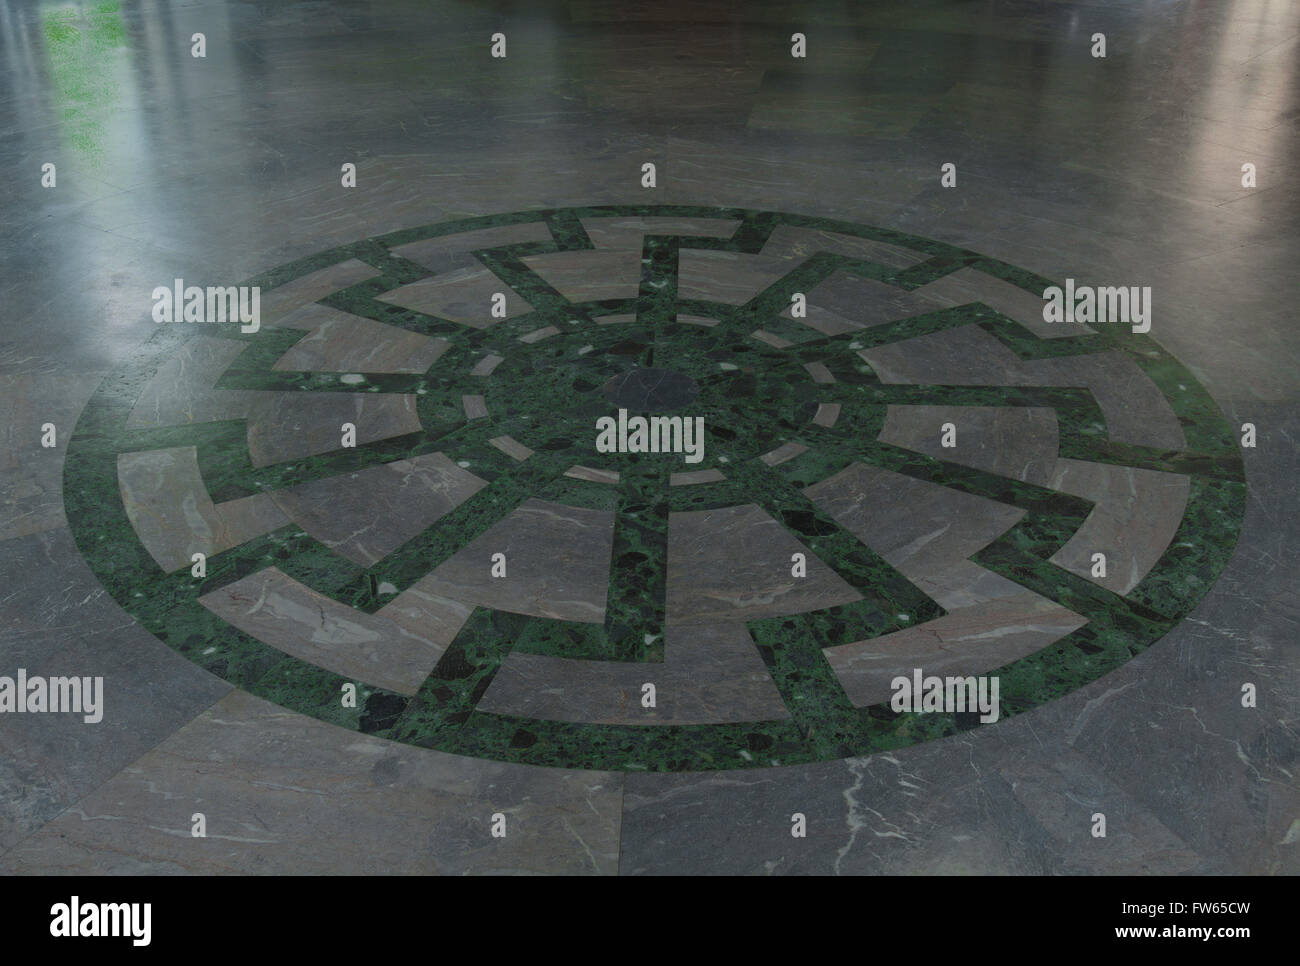 Ornament of the Black Sun wheel mosaic with superimposed swastikas in the floor of Obergruppenführersaal, SS Generals' Hall, Stock Photo